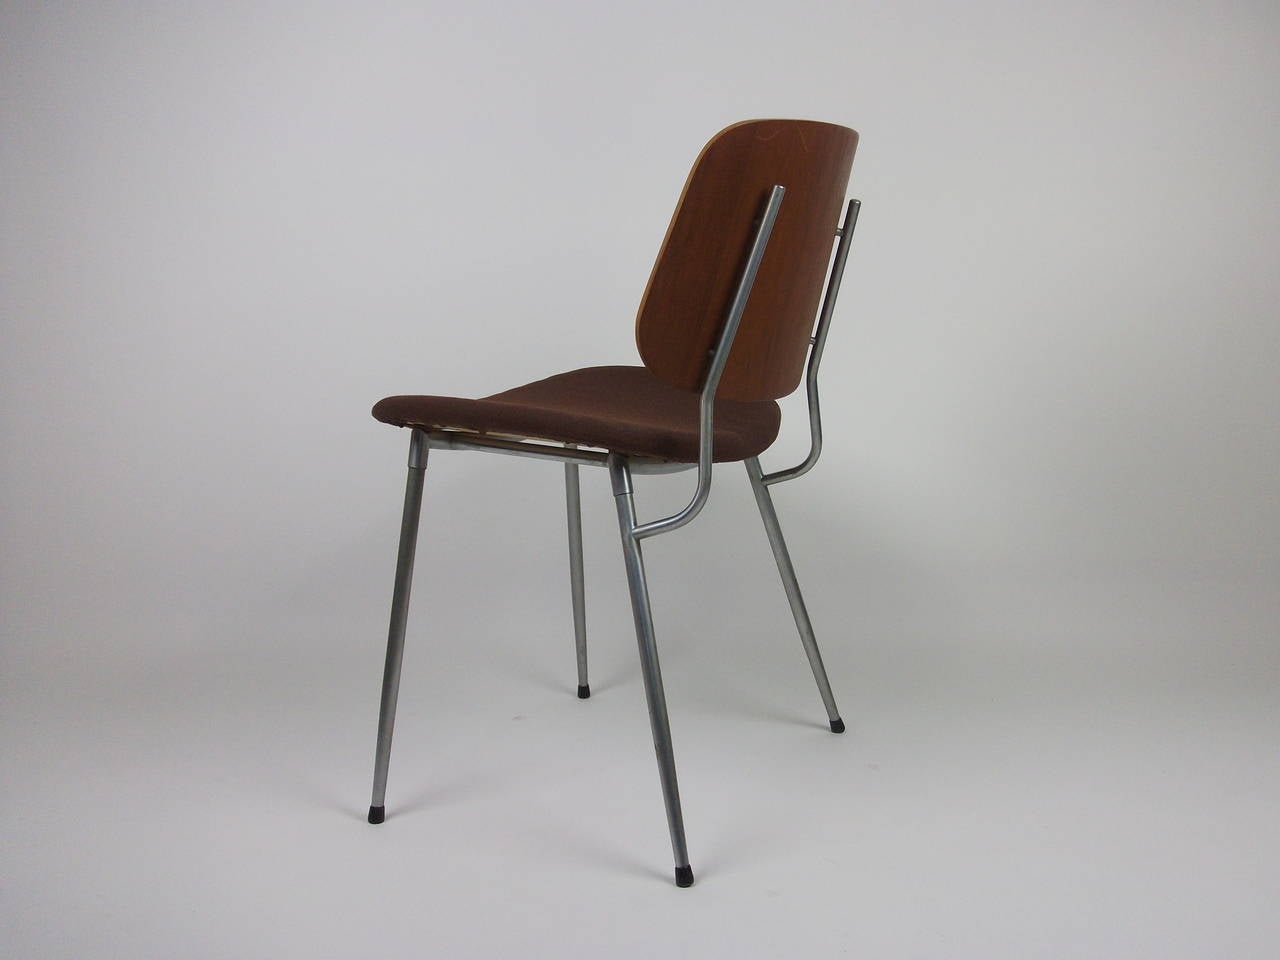 Handsome 1950s teak and polished steel desk chair designed by Børge Mogensen for Soborg Mobelfabrik, Denmark - newly upholstered seat in a brown quality fabric.

Very good vintage condition.